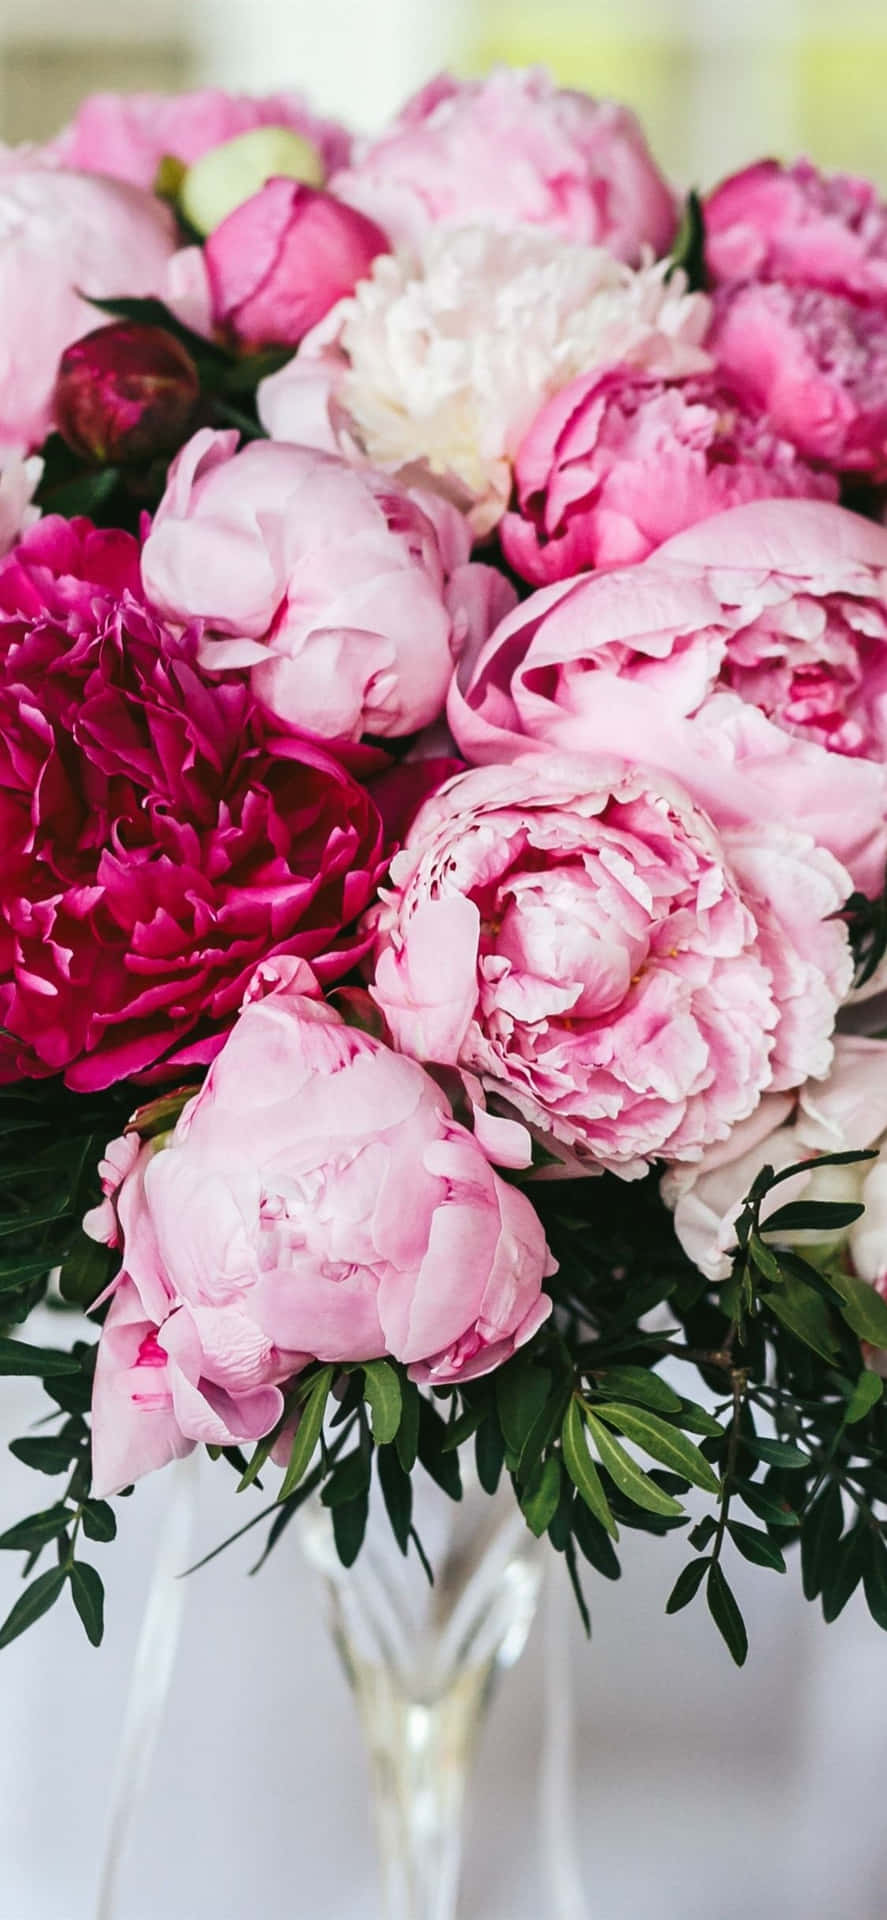 Enjoy the beauty of peonies on your Iphone Wallpaper